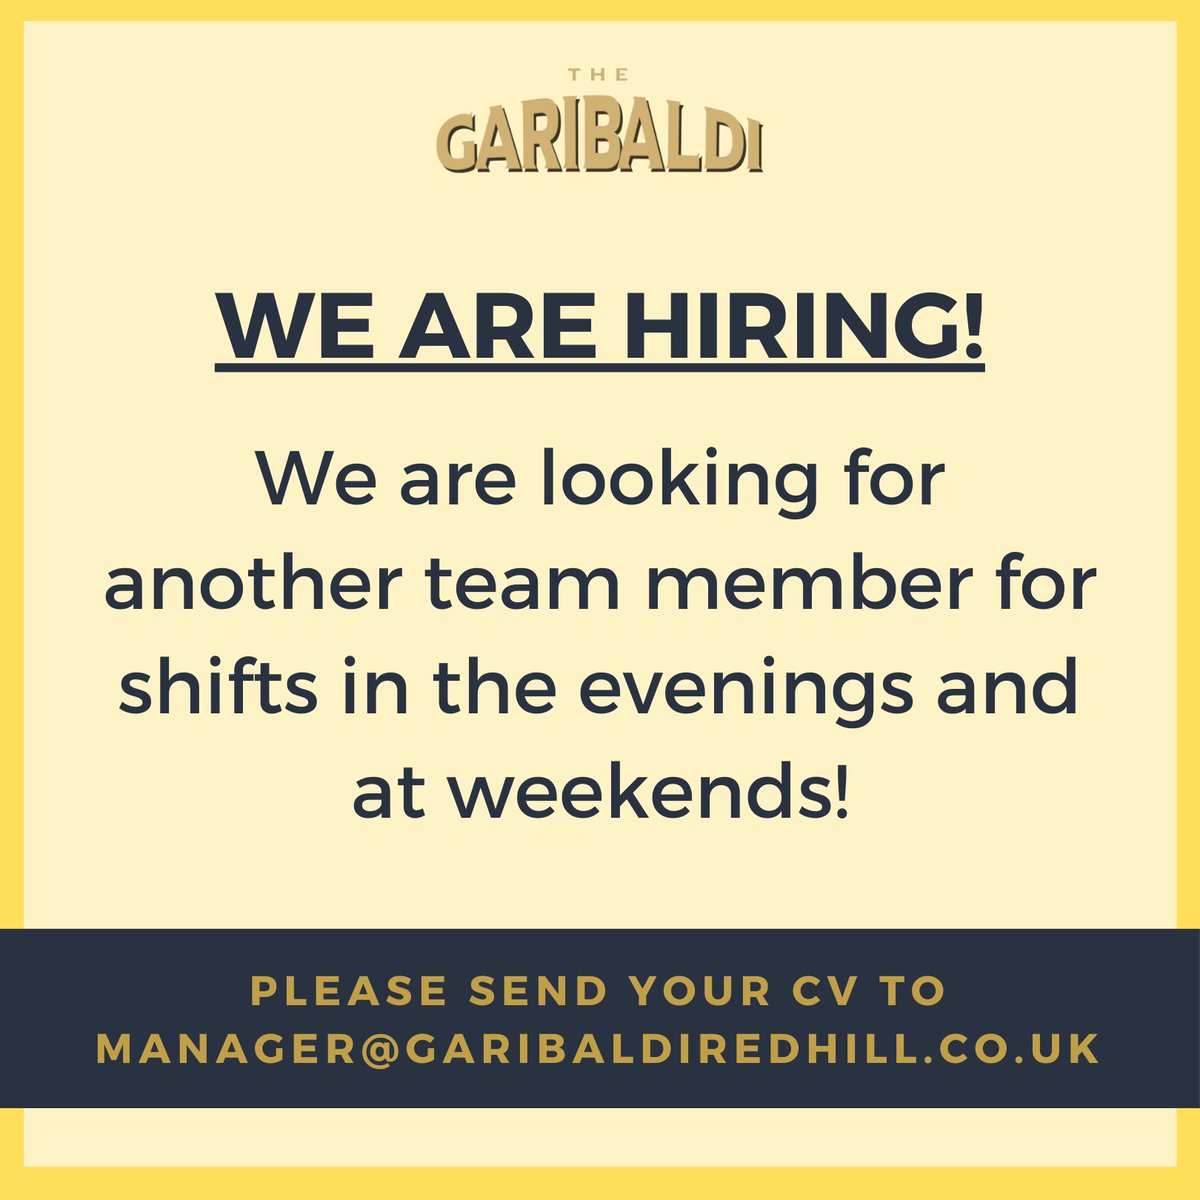 We are hiring! We are looking for another team member for shifts in the evenings and at weekends! Please send your cv to Manager@garibaldiredhill.co.uk